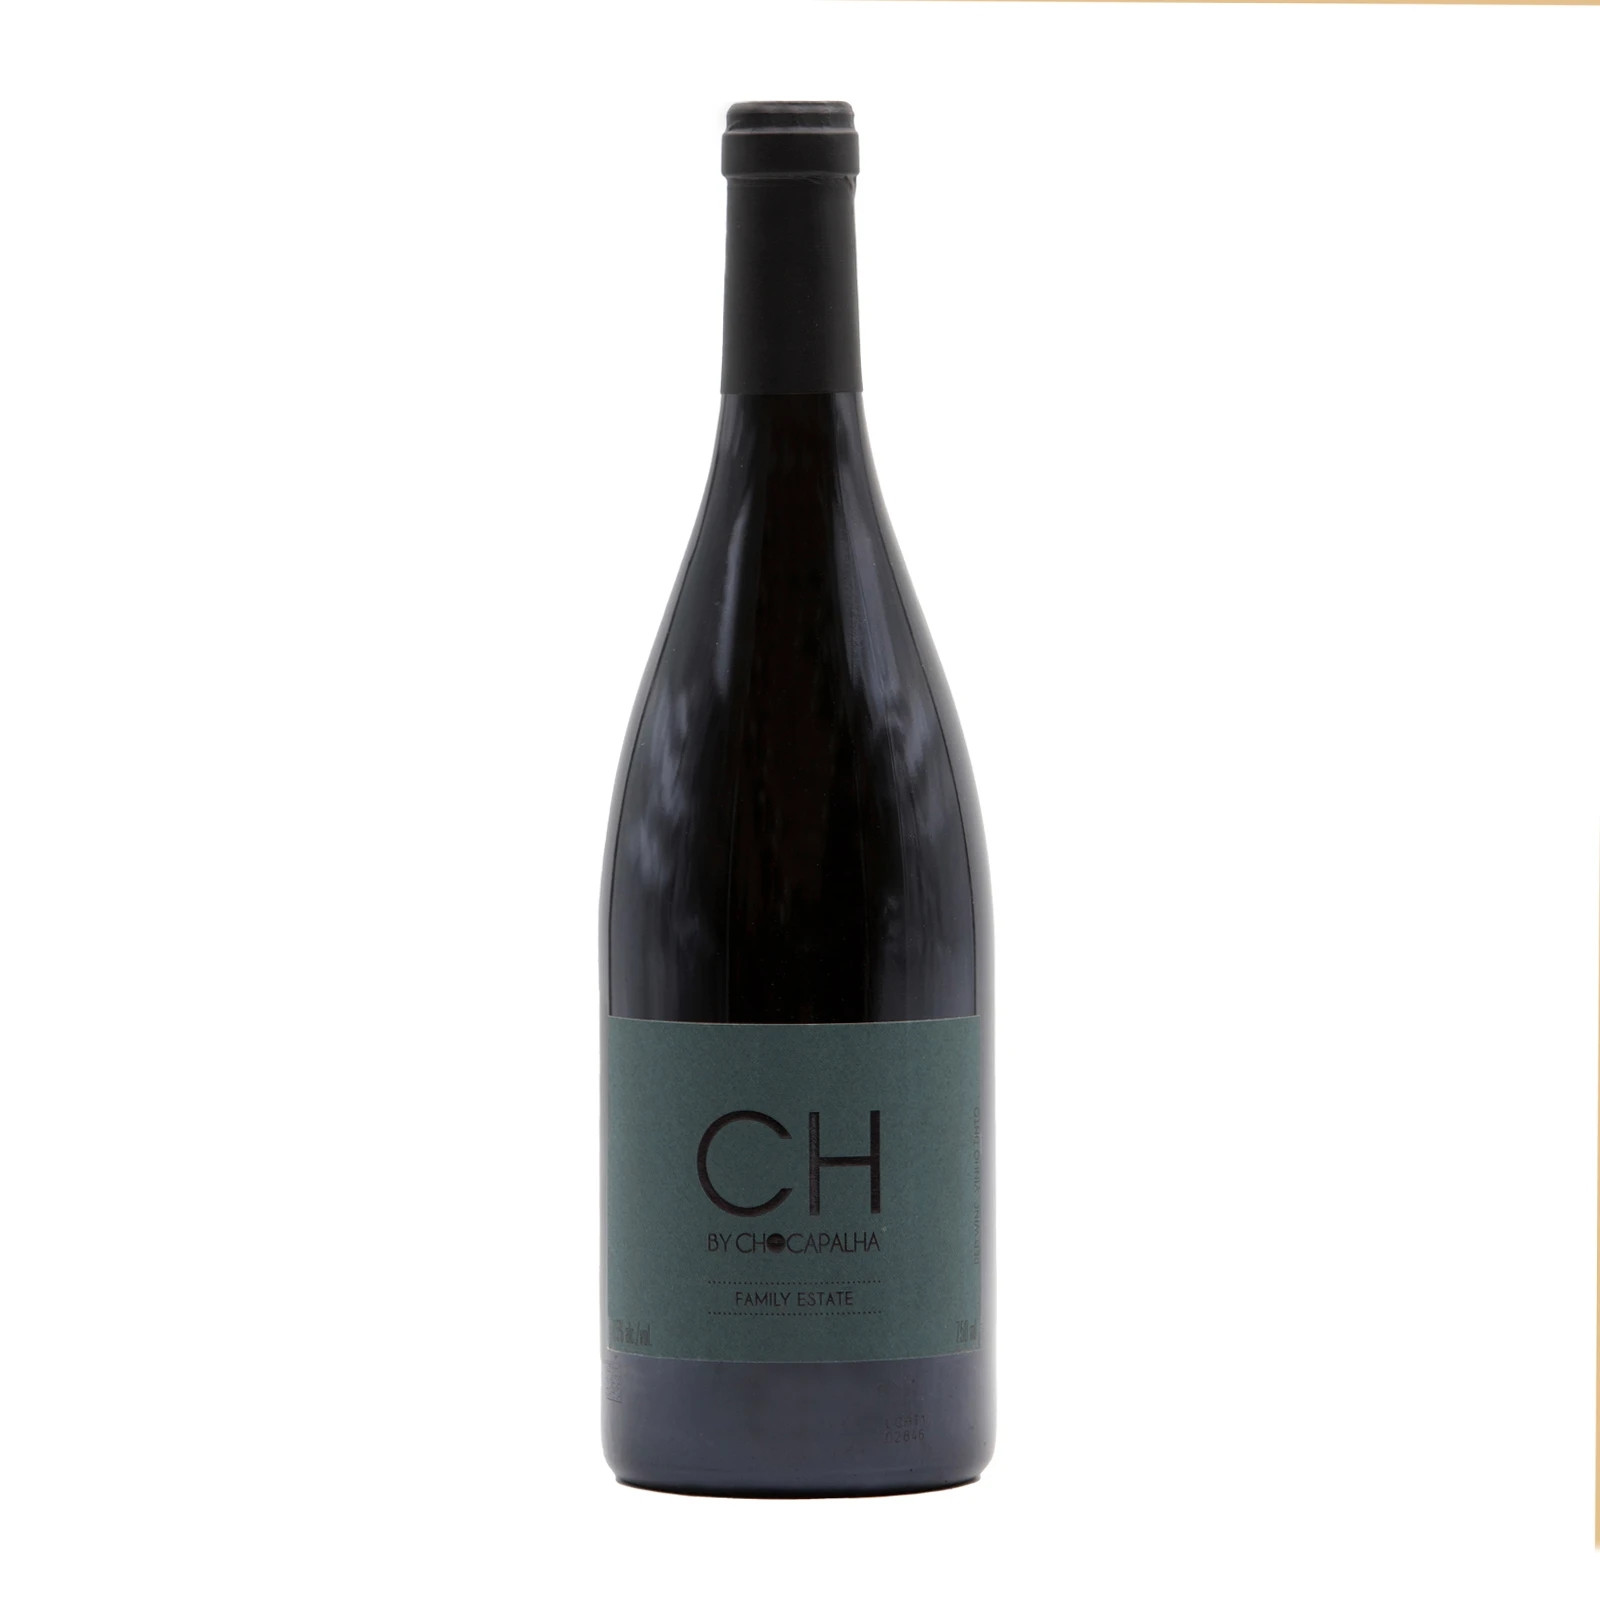 Ch By Chocapalha Rosso 2019